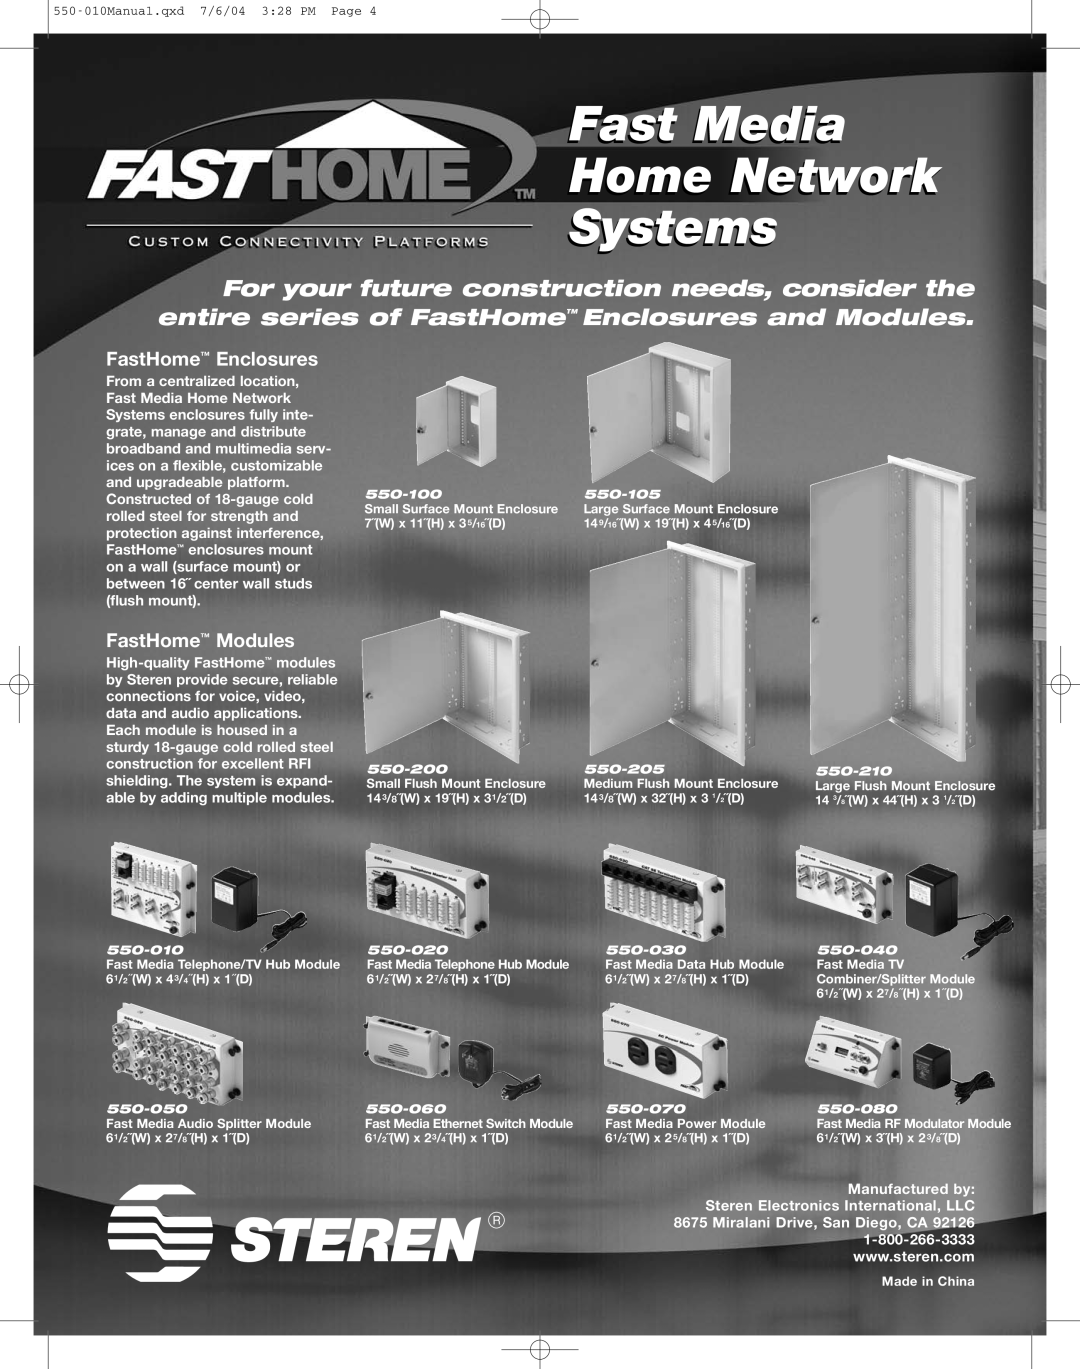 Steren 550-010 manual Fast Media Home Network Systems, FastHome Enclosures, FastHome Modules 